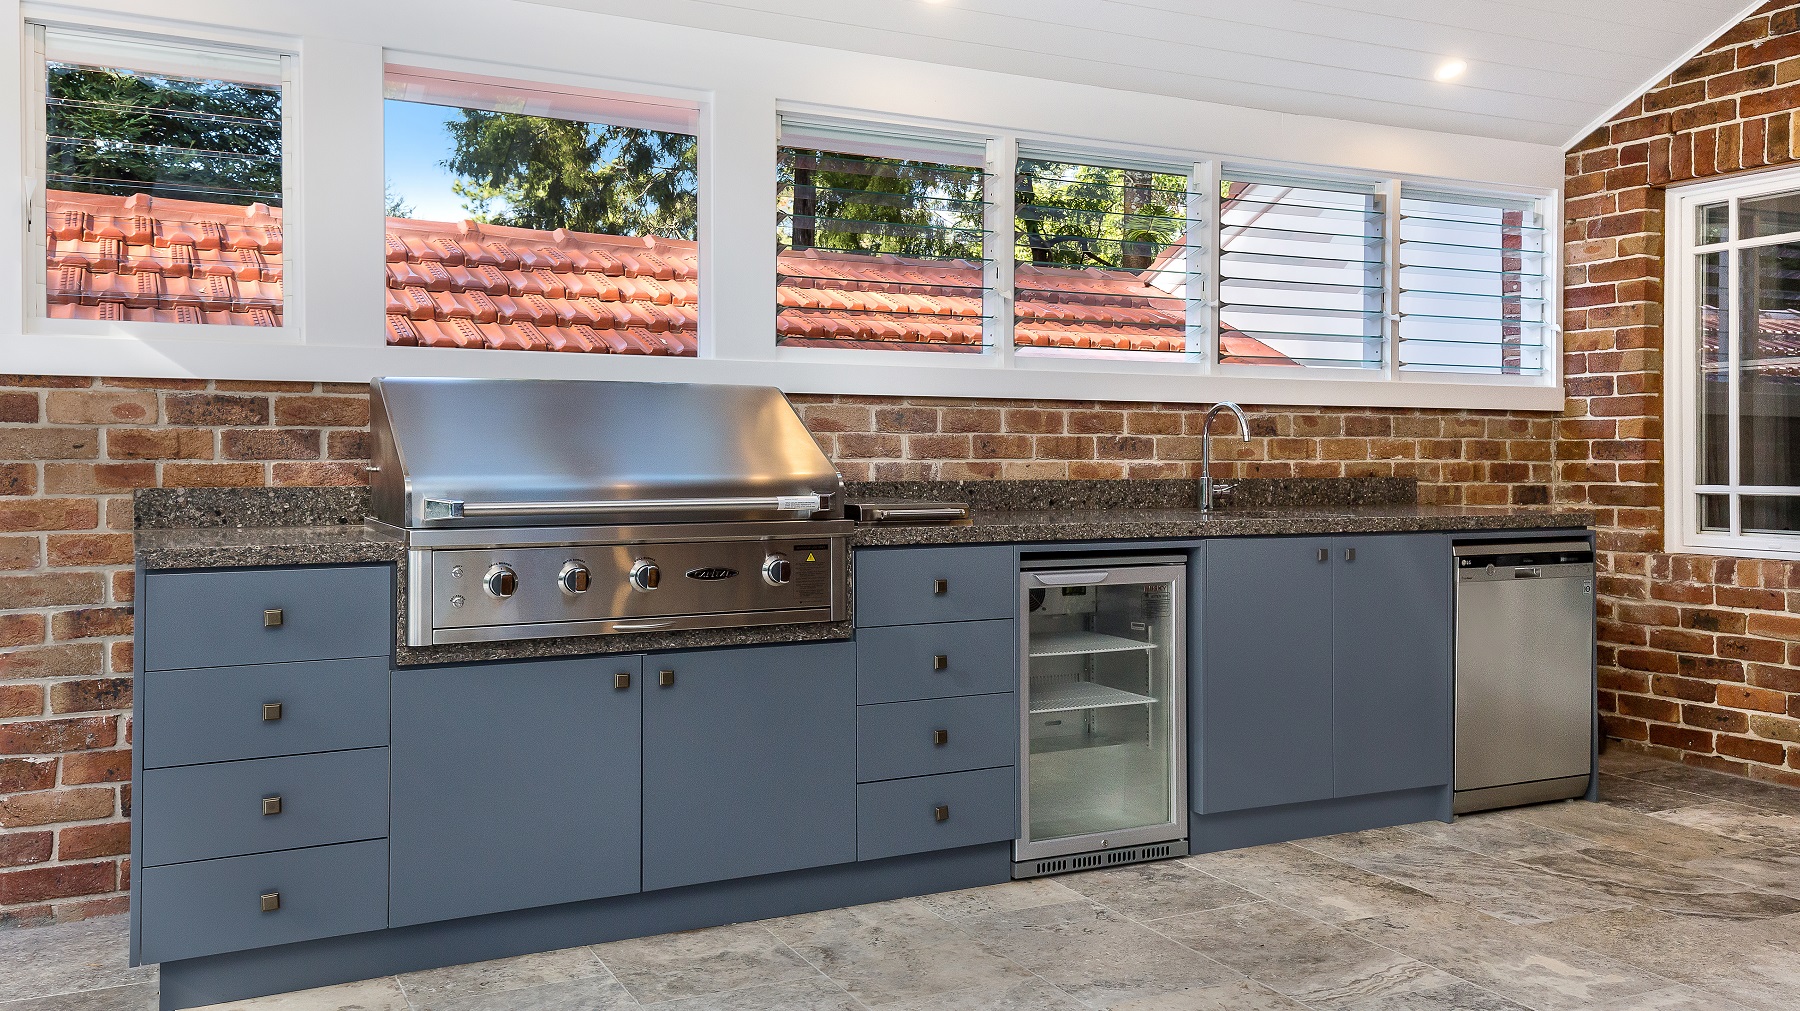 Waterproof Polyurethane outdoor BBQ area with bar fridge and granite benchtop - Wahroonga, Sydney